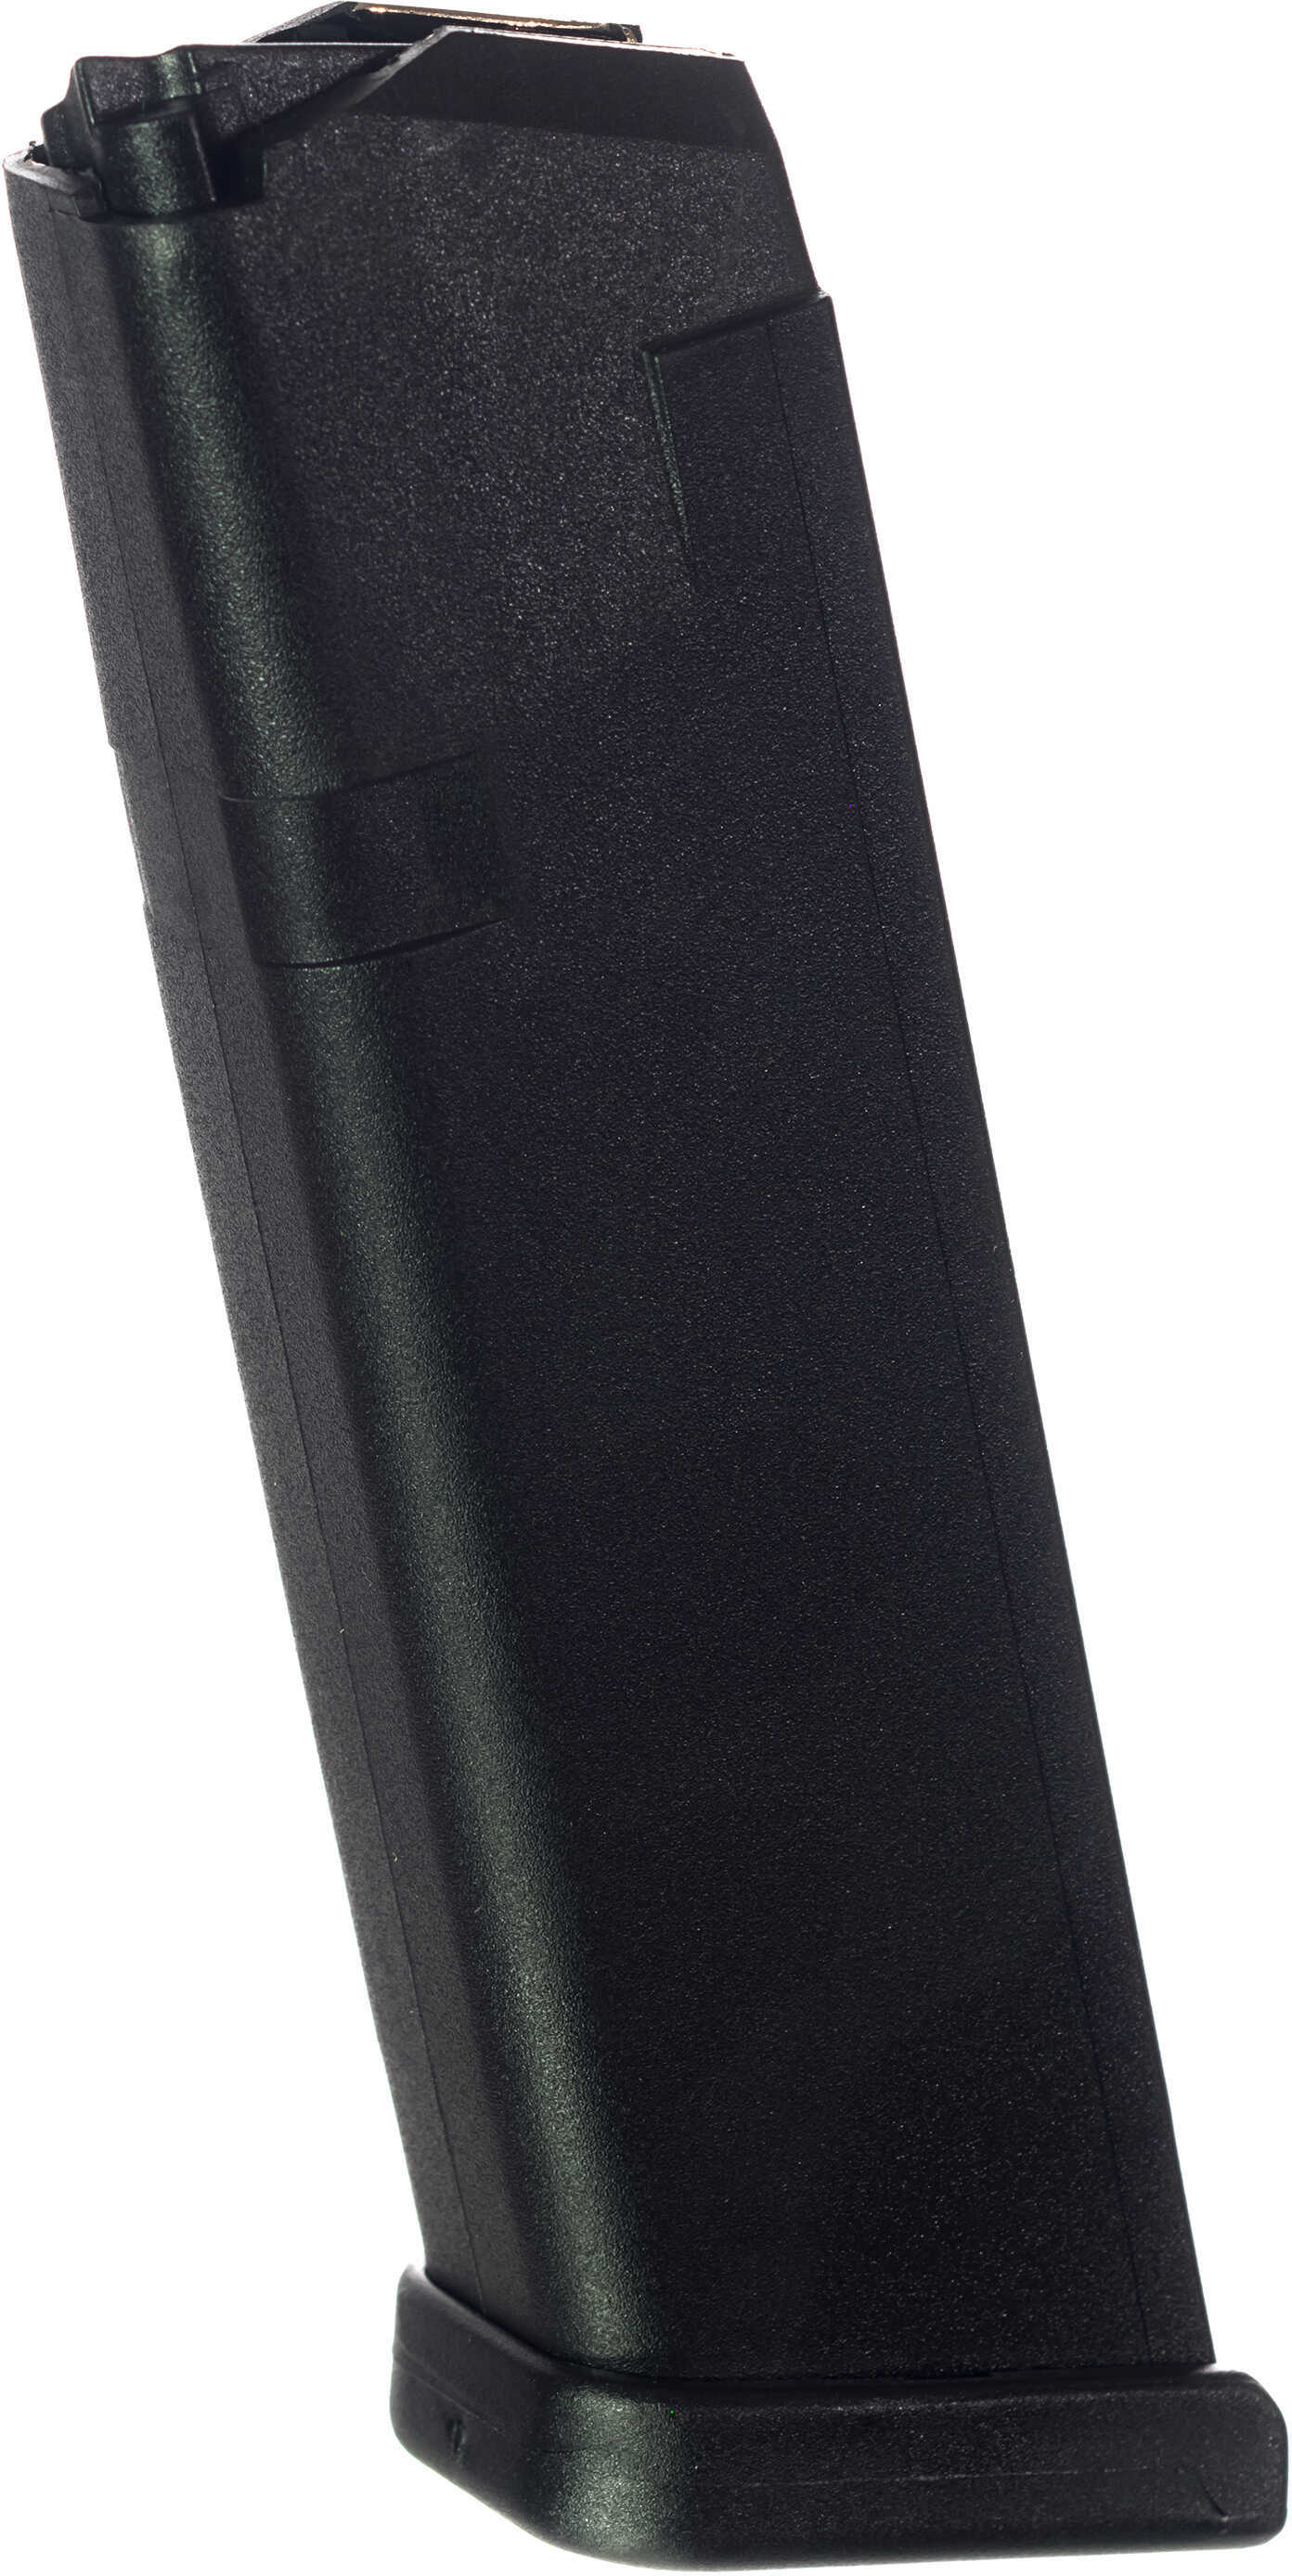 ProMag for Glock 17/19/26 Magazine 9 MM Rounds Black Polymer Md: GLK-A9B